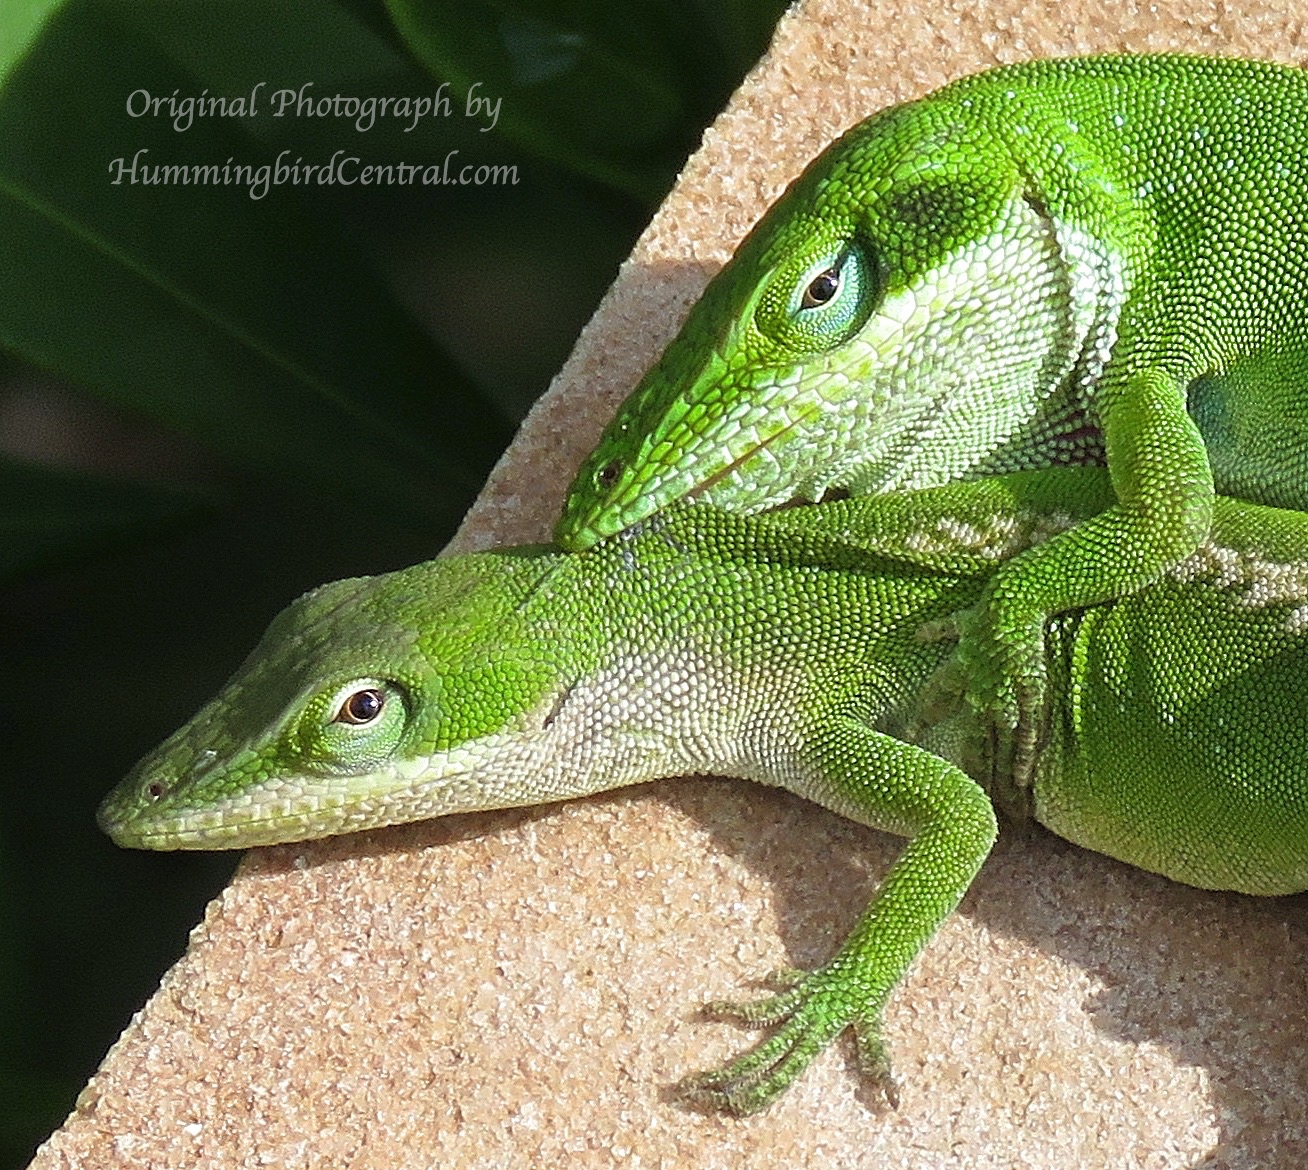 Creatures in our nature preserve ... Green Anoles